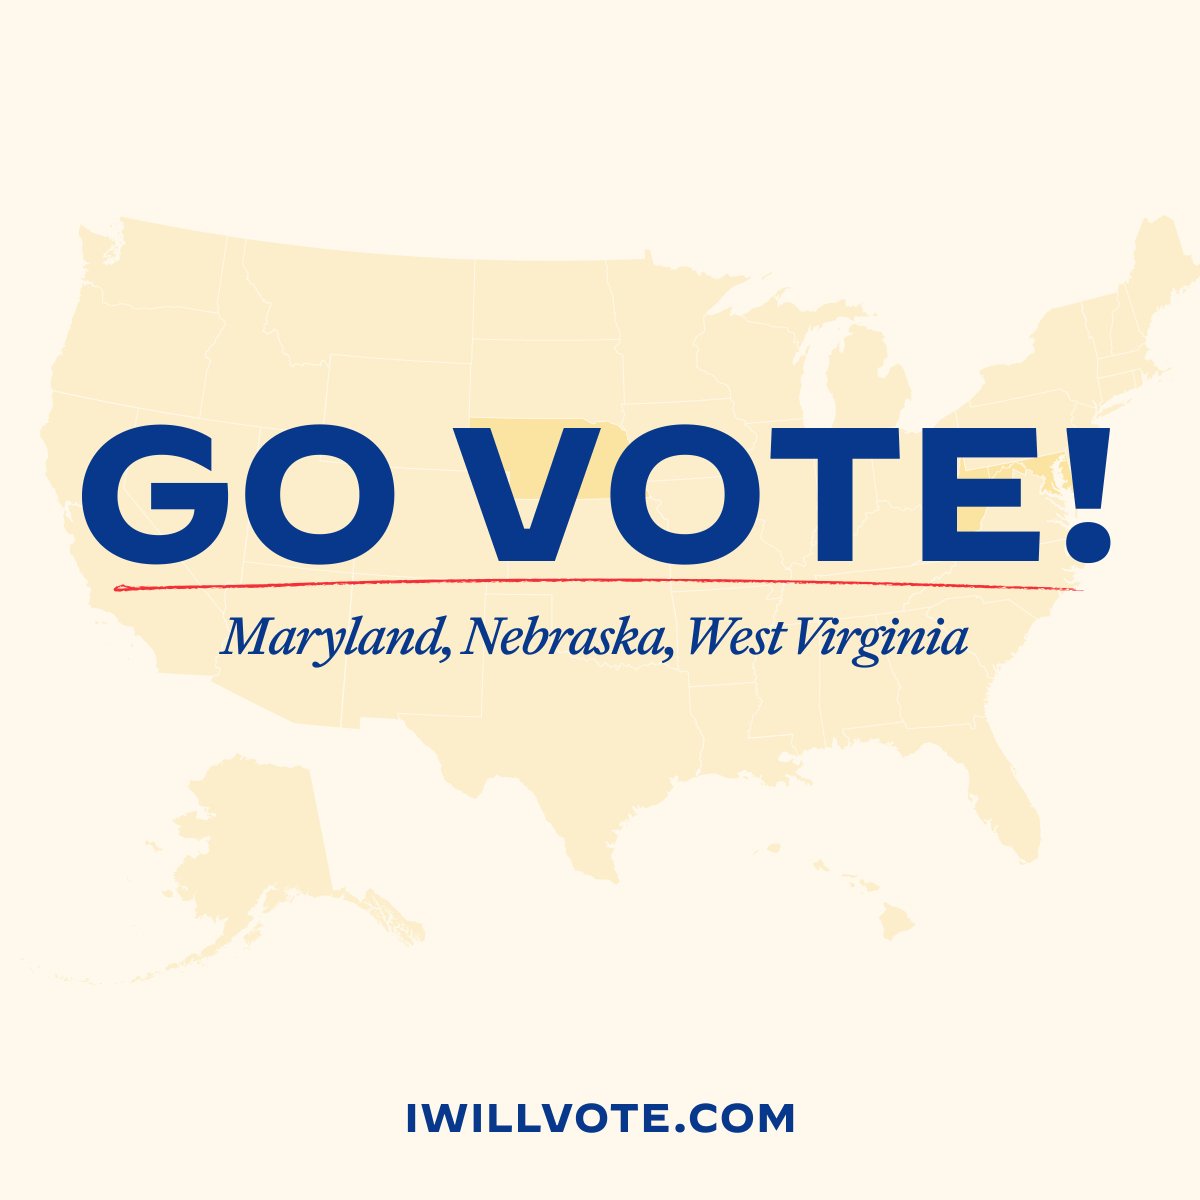 There’s too much on the line to sit this presidential primary out. If you’re in Maryland, Nebraska, or West Virginia, head to IWillVote.com to confirm your polling place.